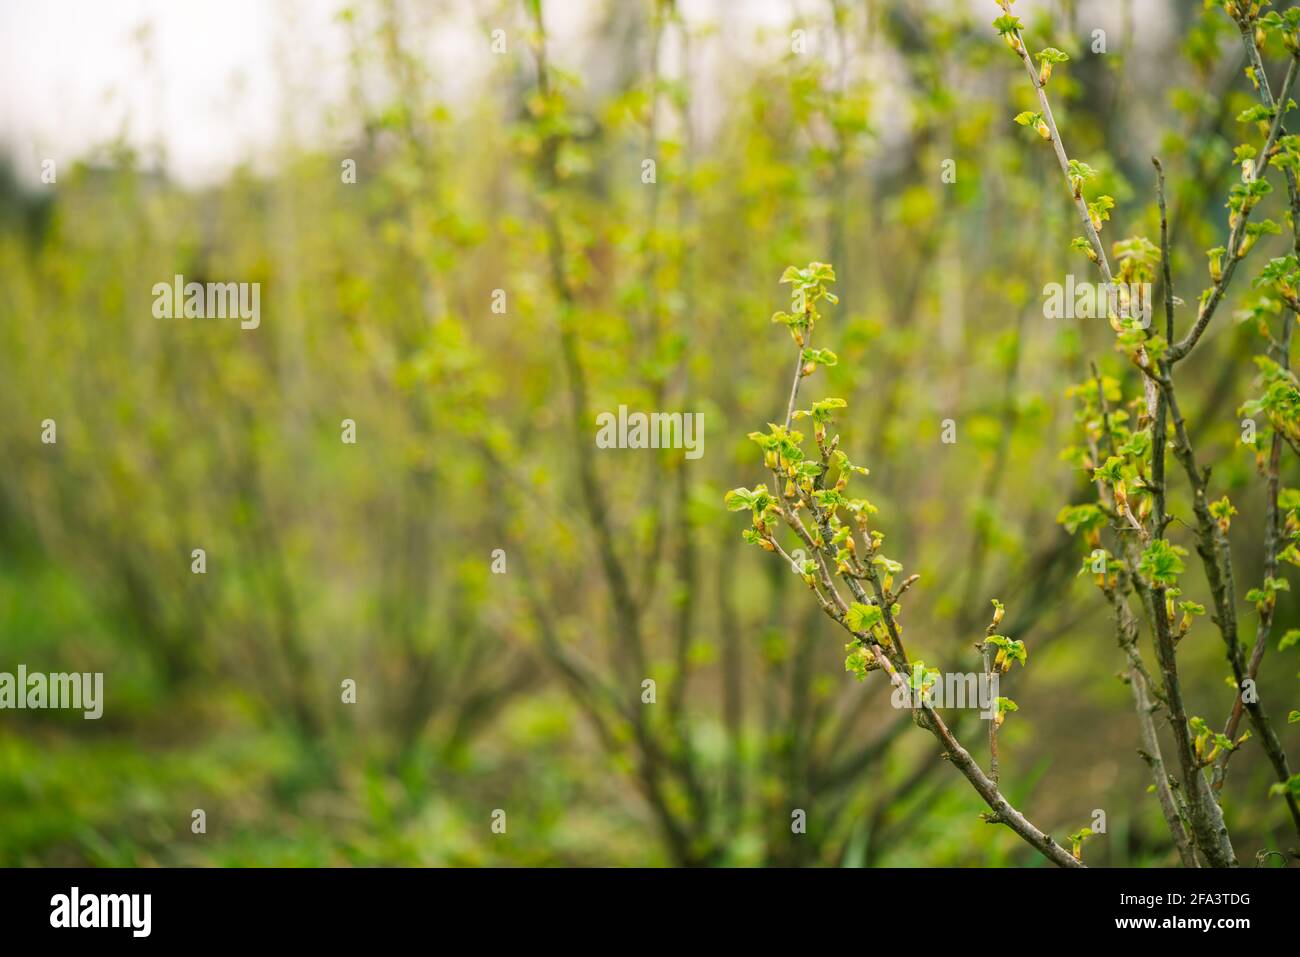 fresh new buds on currant branches at springtime farm garden background Stock Photo